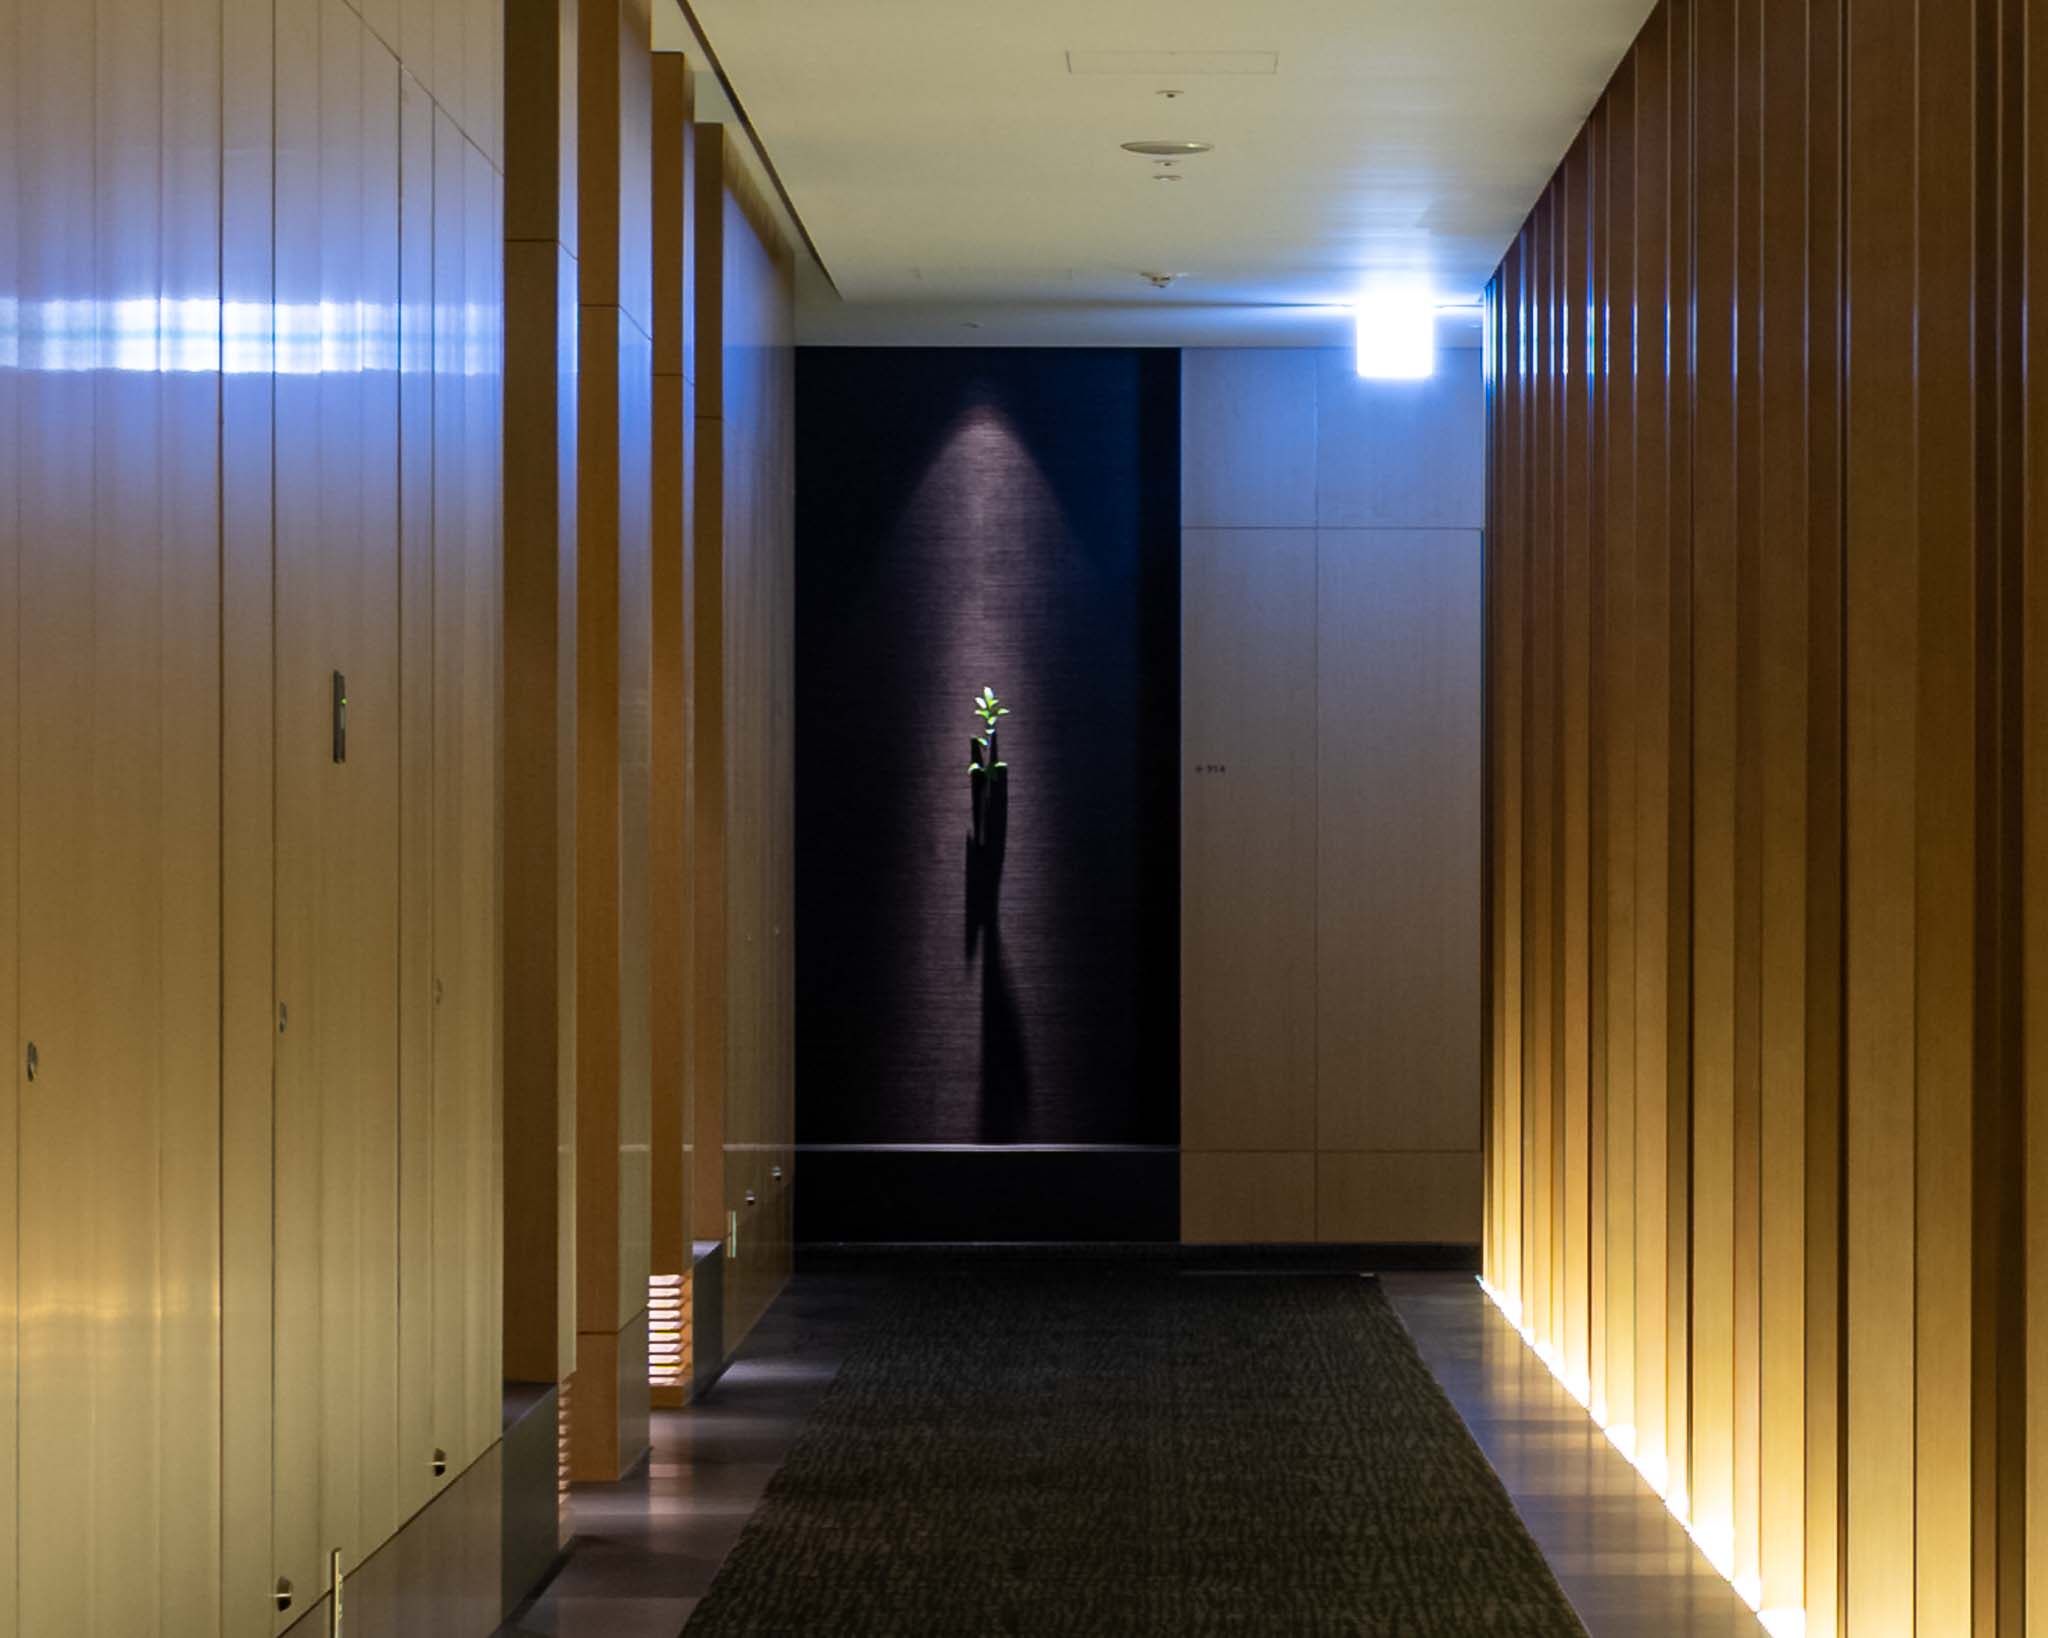 a hallway with wood paneled walls and a black carpet